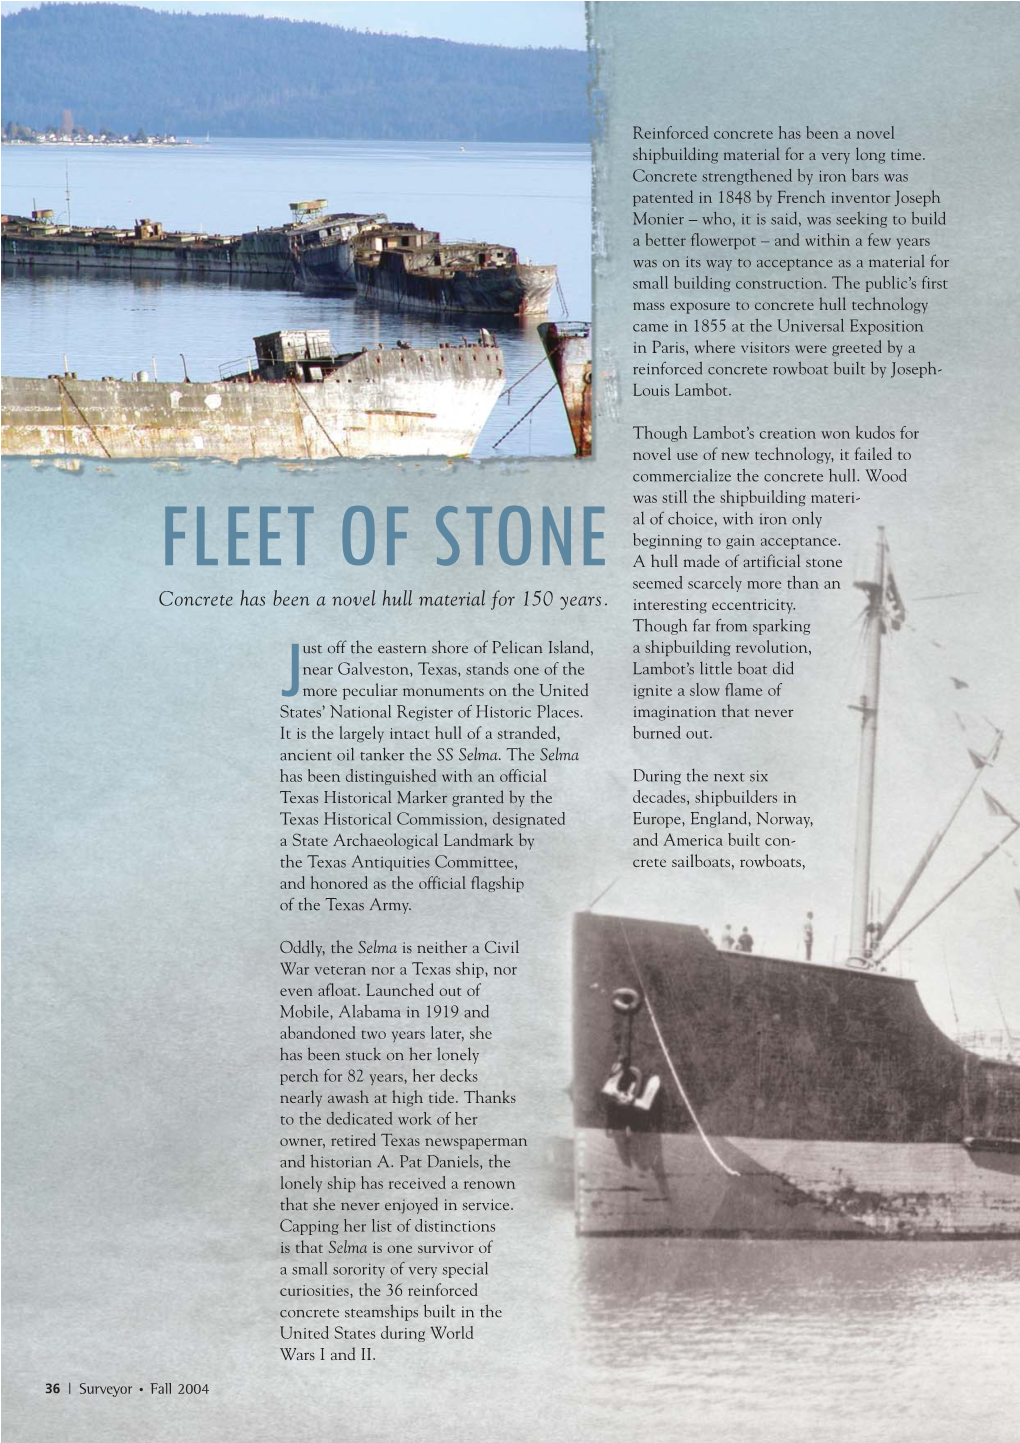 FLEET of STONE a Hull Made of Artificial Stone Seemed Scarcely More Than an Concrete Has Been a Novel Hull Material for 150 Years